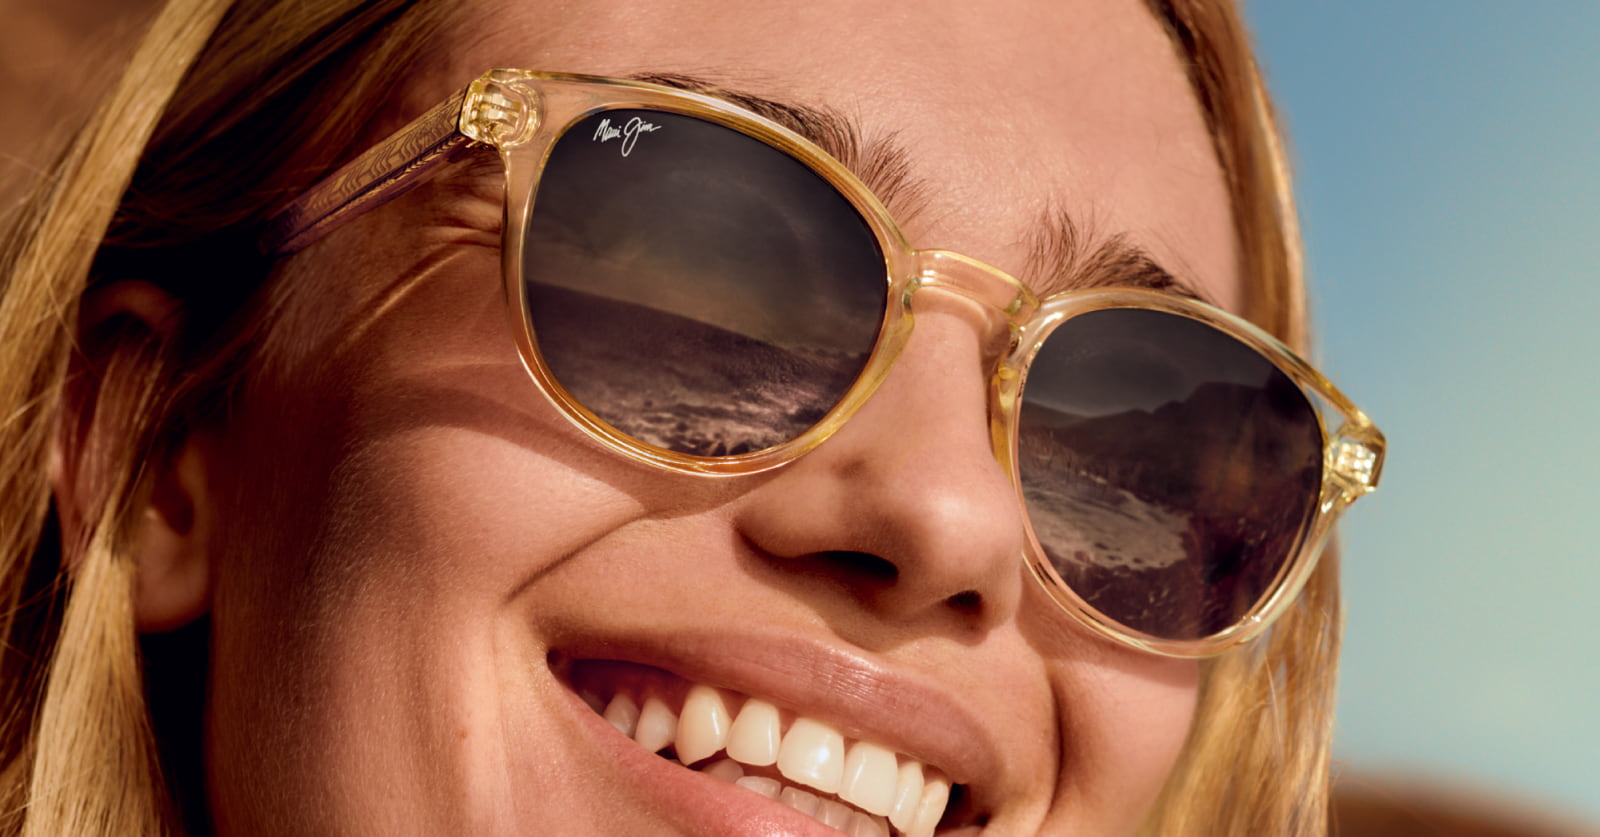 Maui Jim Sunglasses: The Eyewear Label With Special Lenses